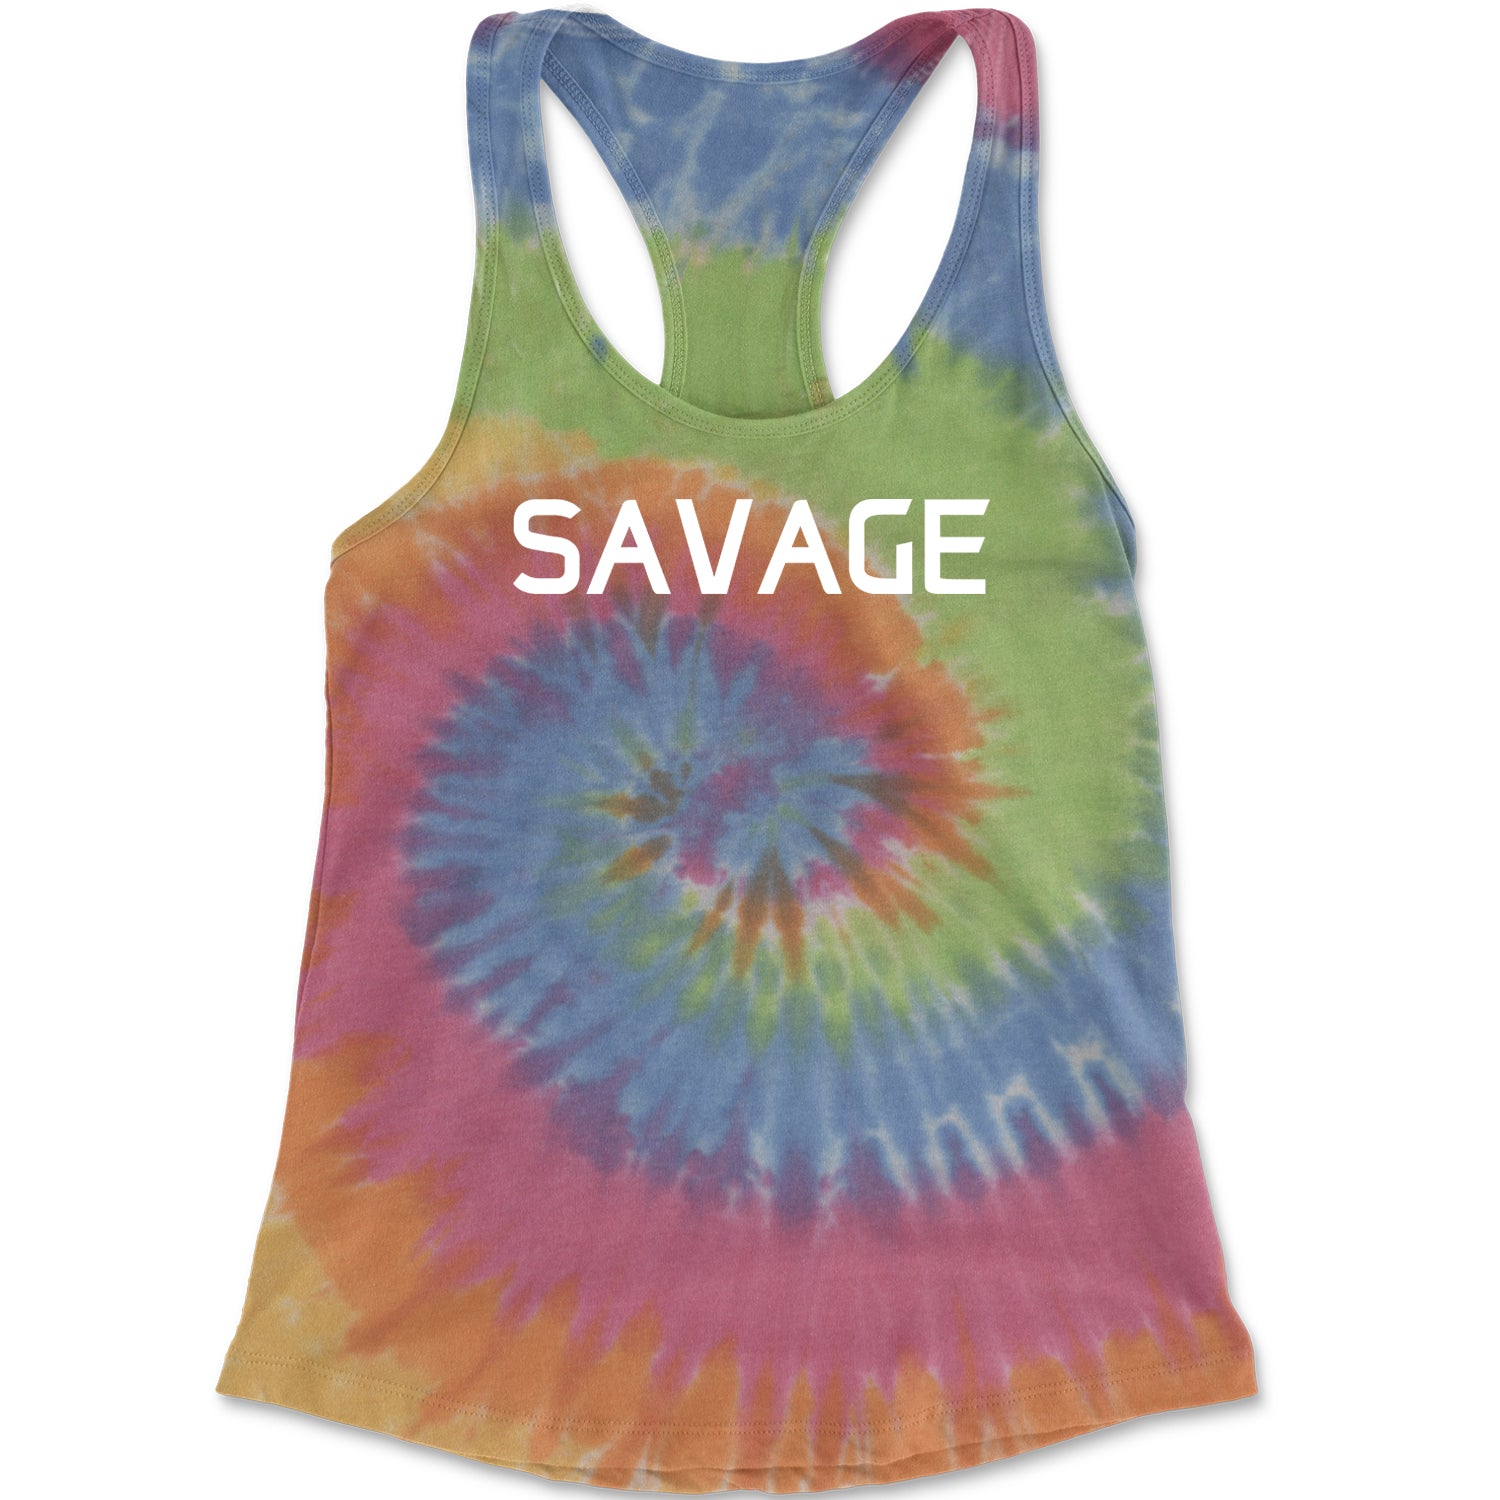 Savage Racerback Tank Top for Women #expressiontees by Expression Tees